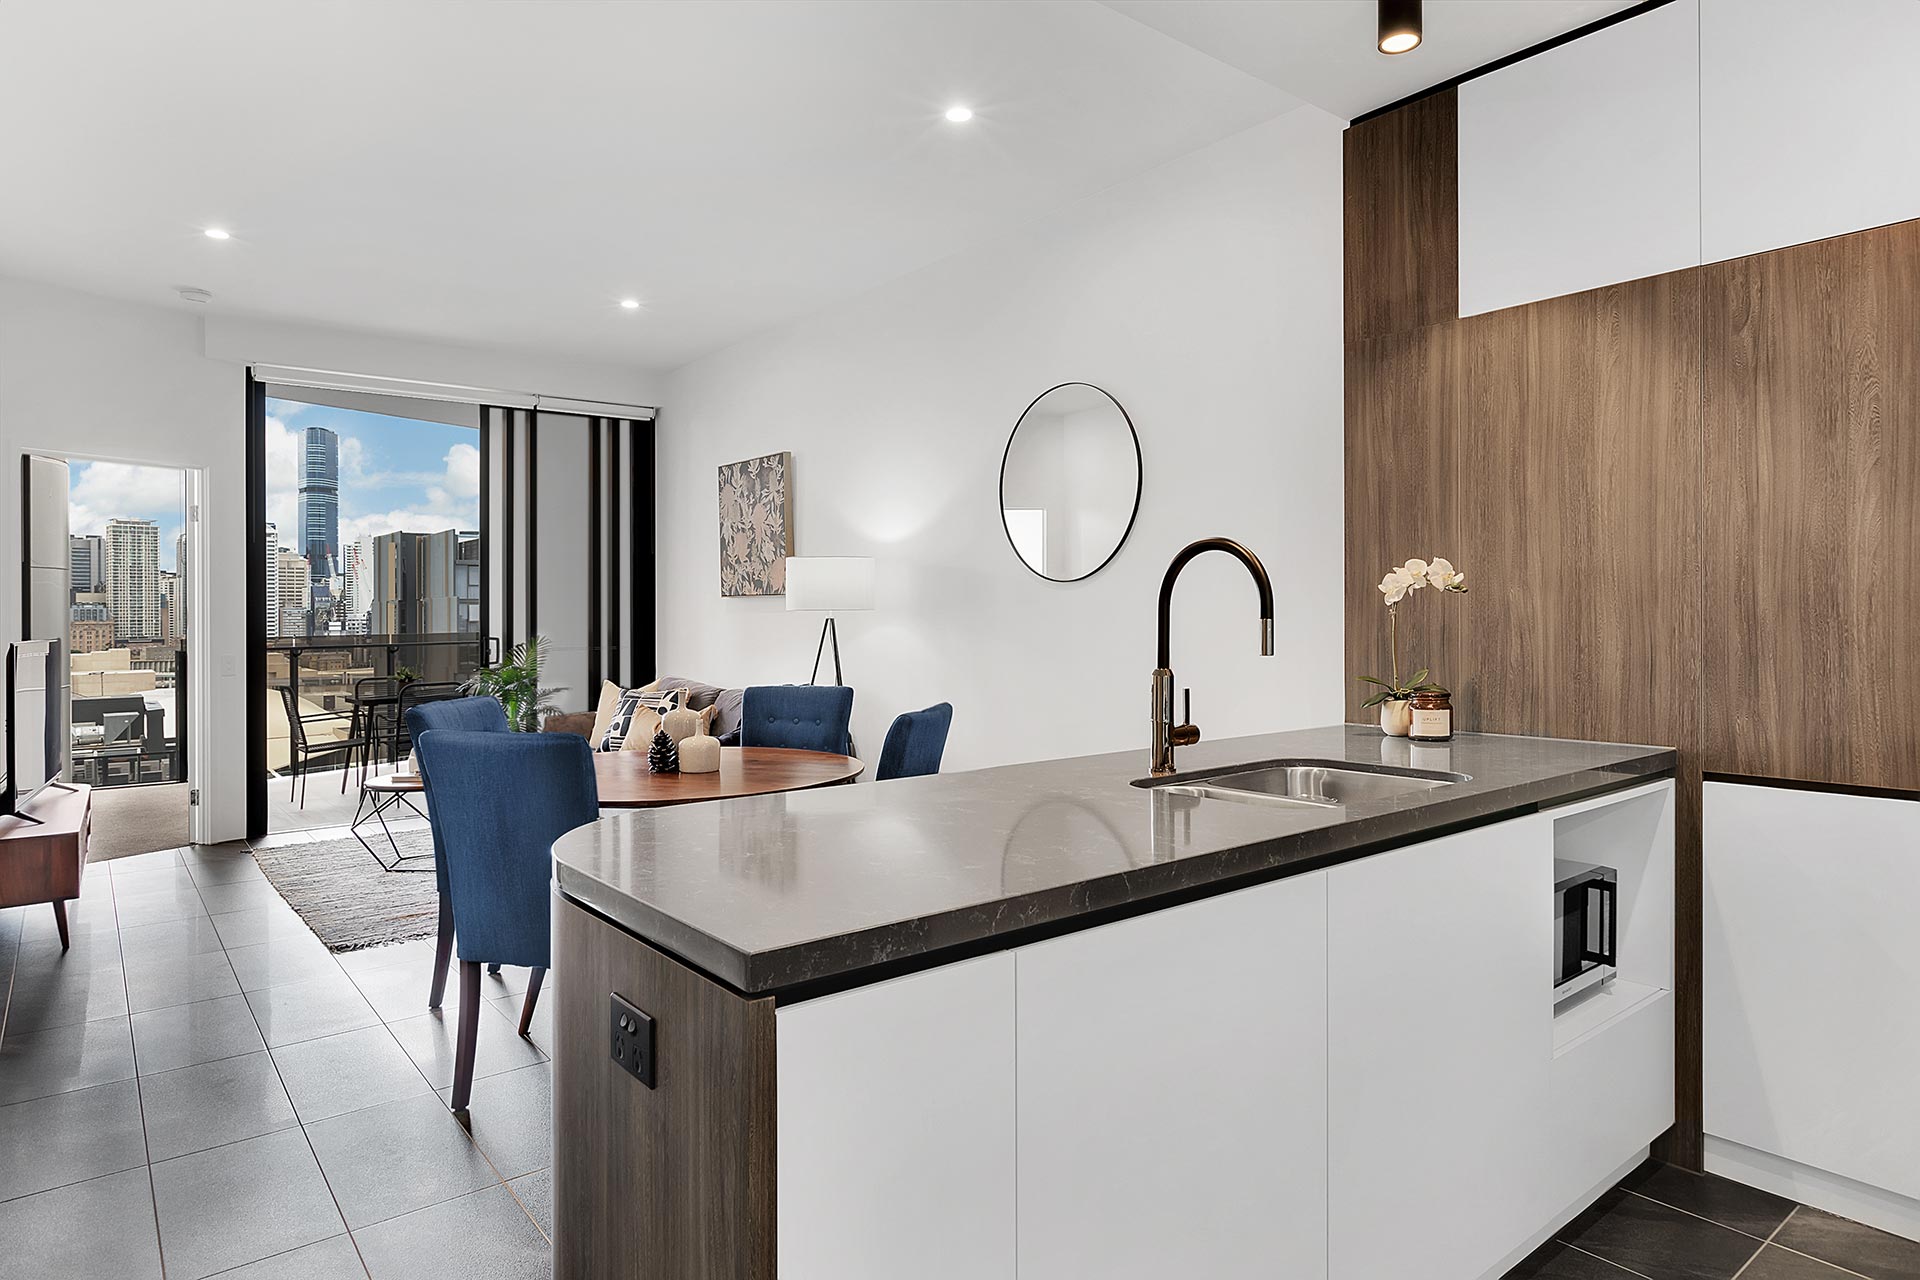 Kitchen - One Bedroom Apartment With Study - Urban Rest - Halo Apartments - Brisbane